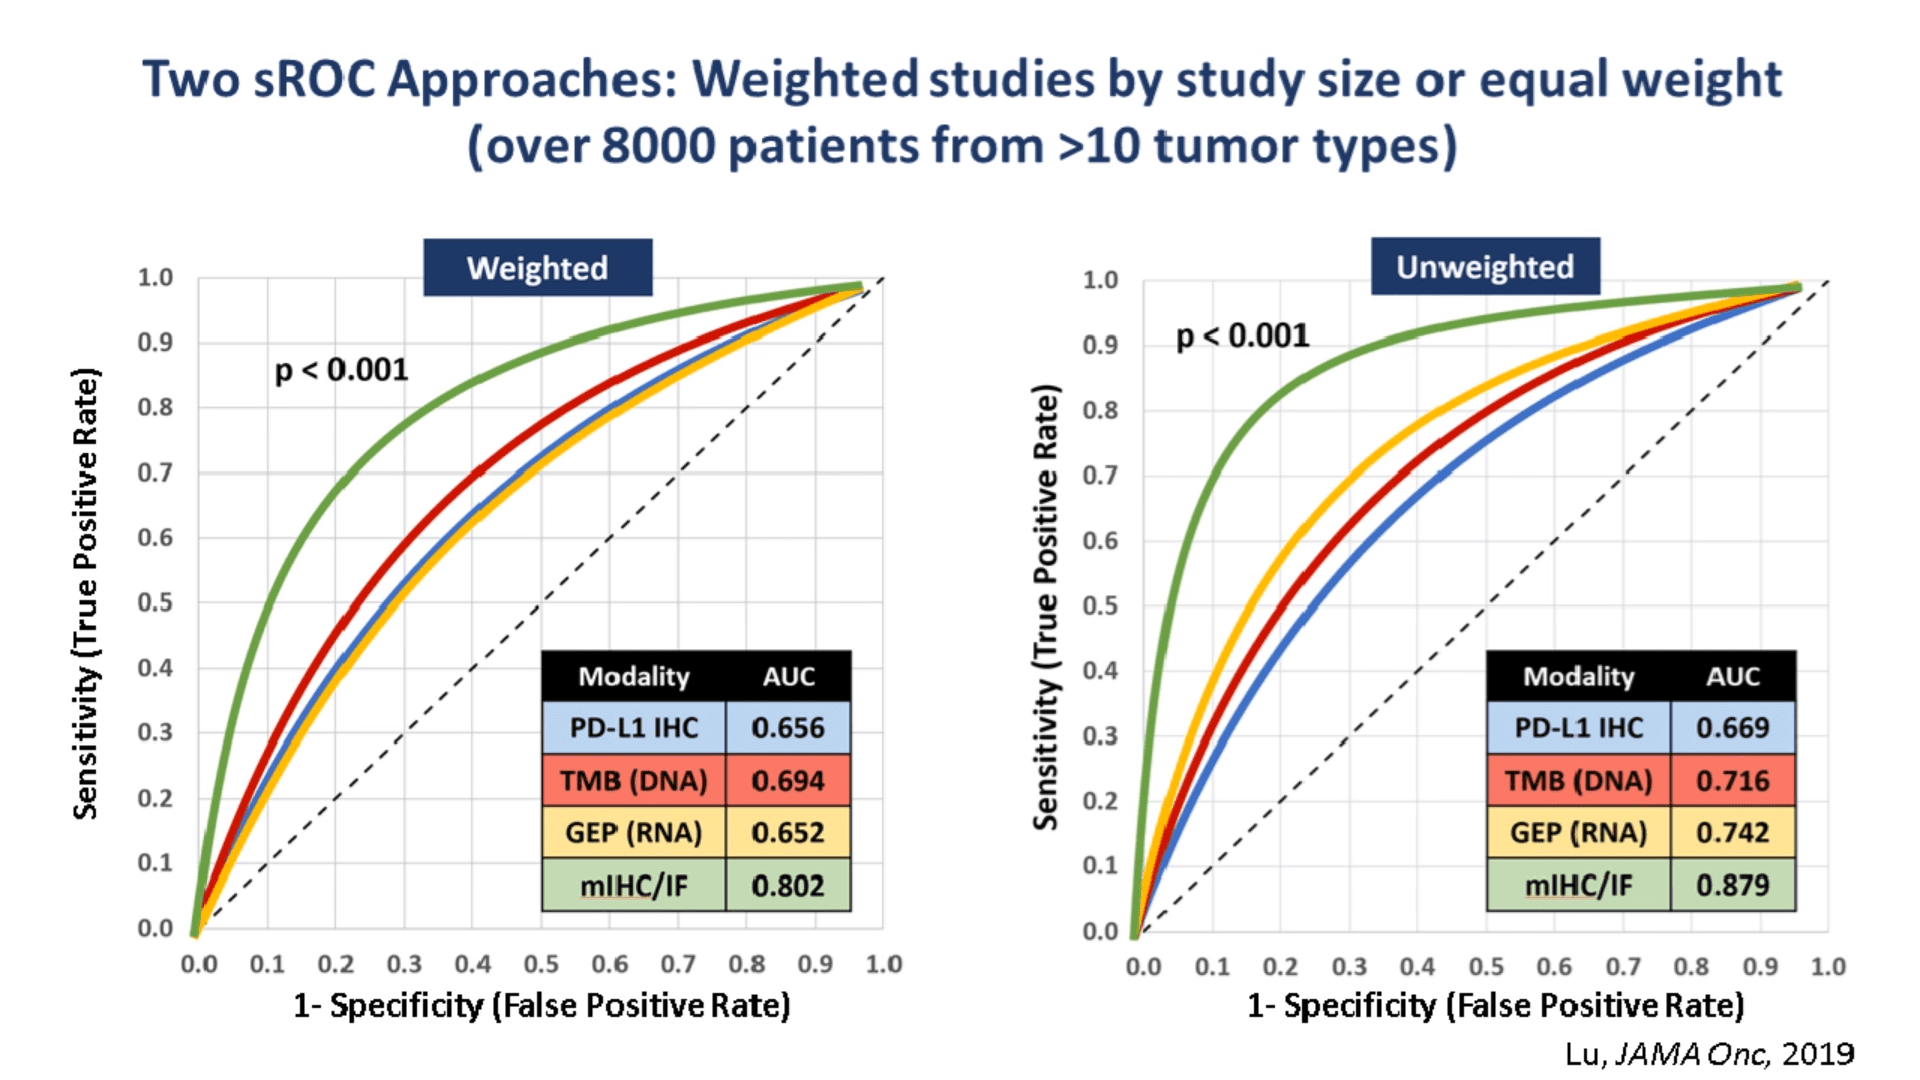 Weighted and unweighted ROC curves comparing biomarker modalities: PD-L1 IHC, TMB, GEP, mIF/IHC